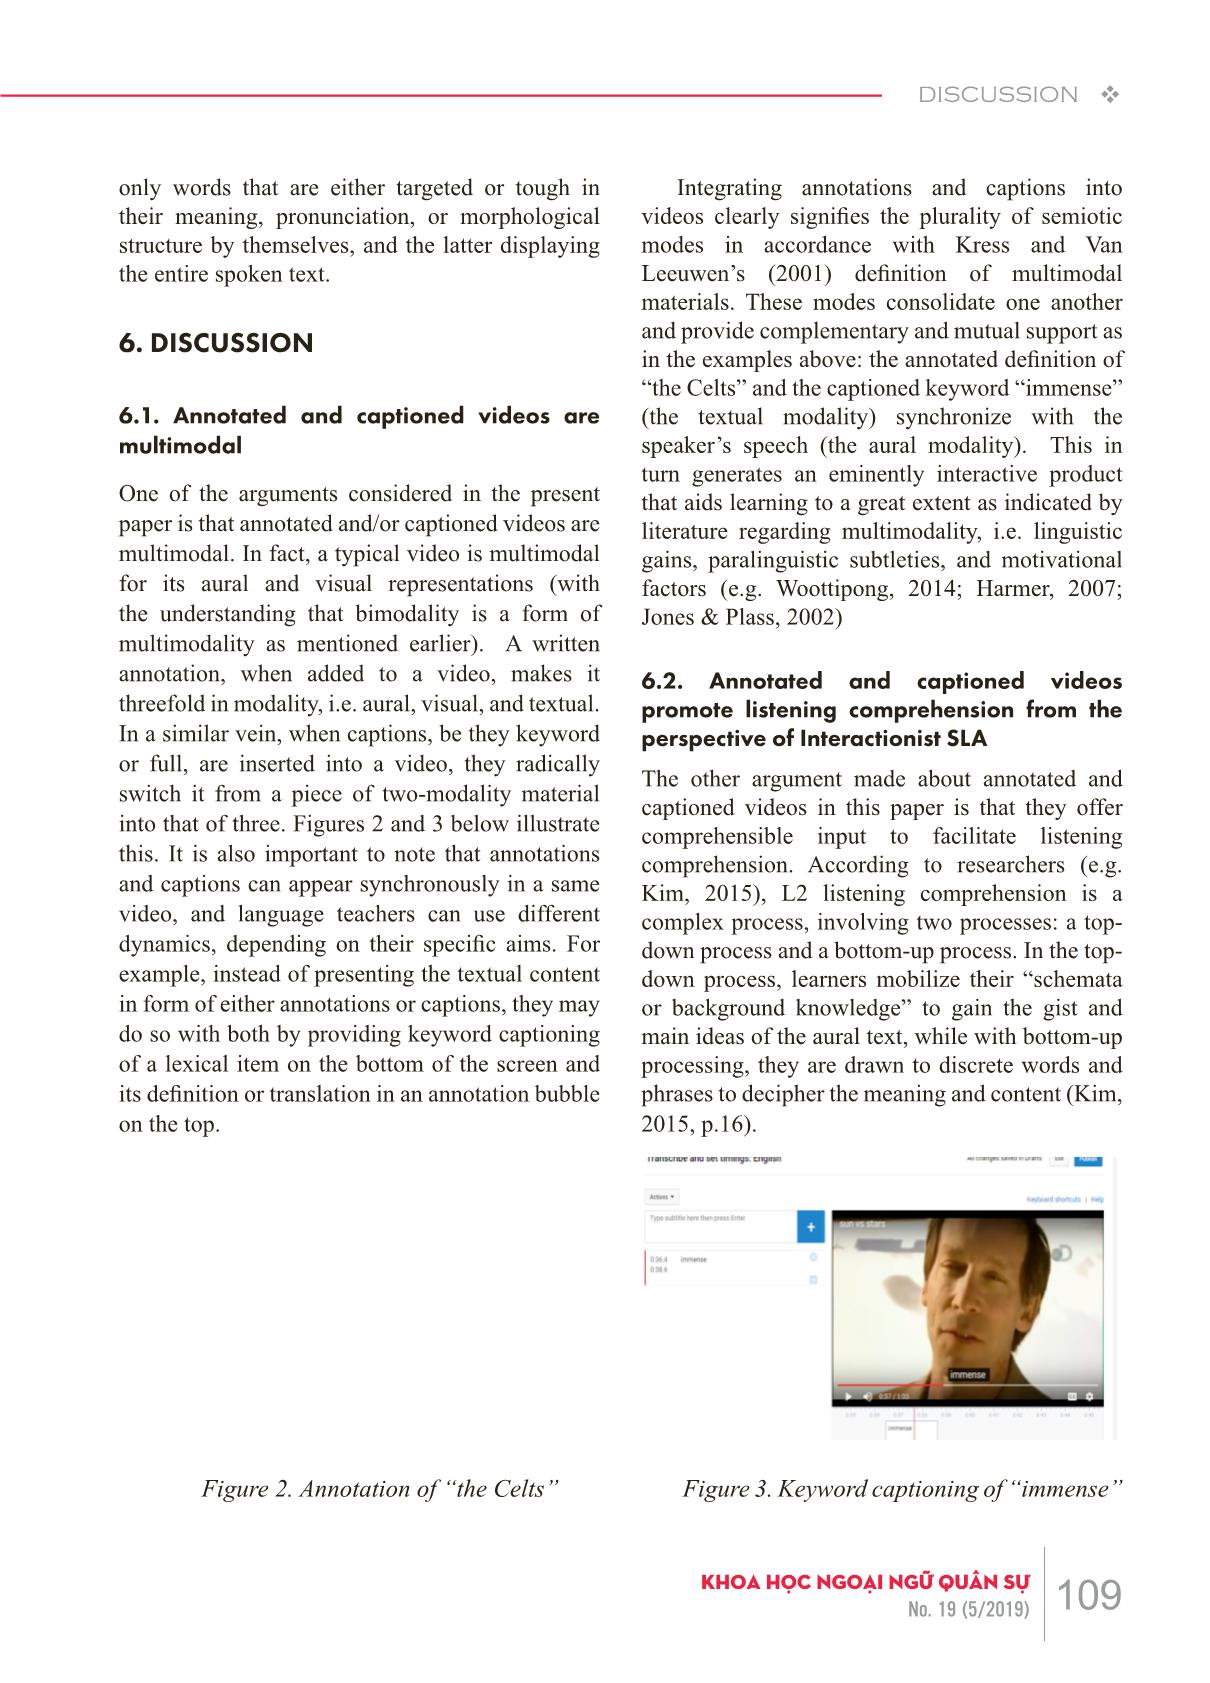 How input - Enhanced authentic videos support english listening comprehension: A discussion from an interactionist perspective trang 5